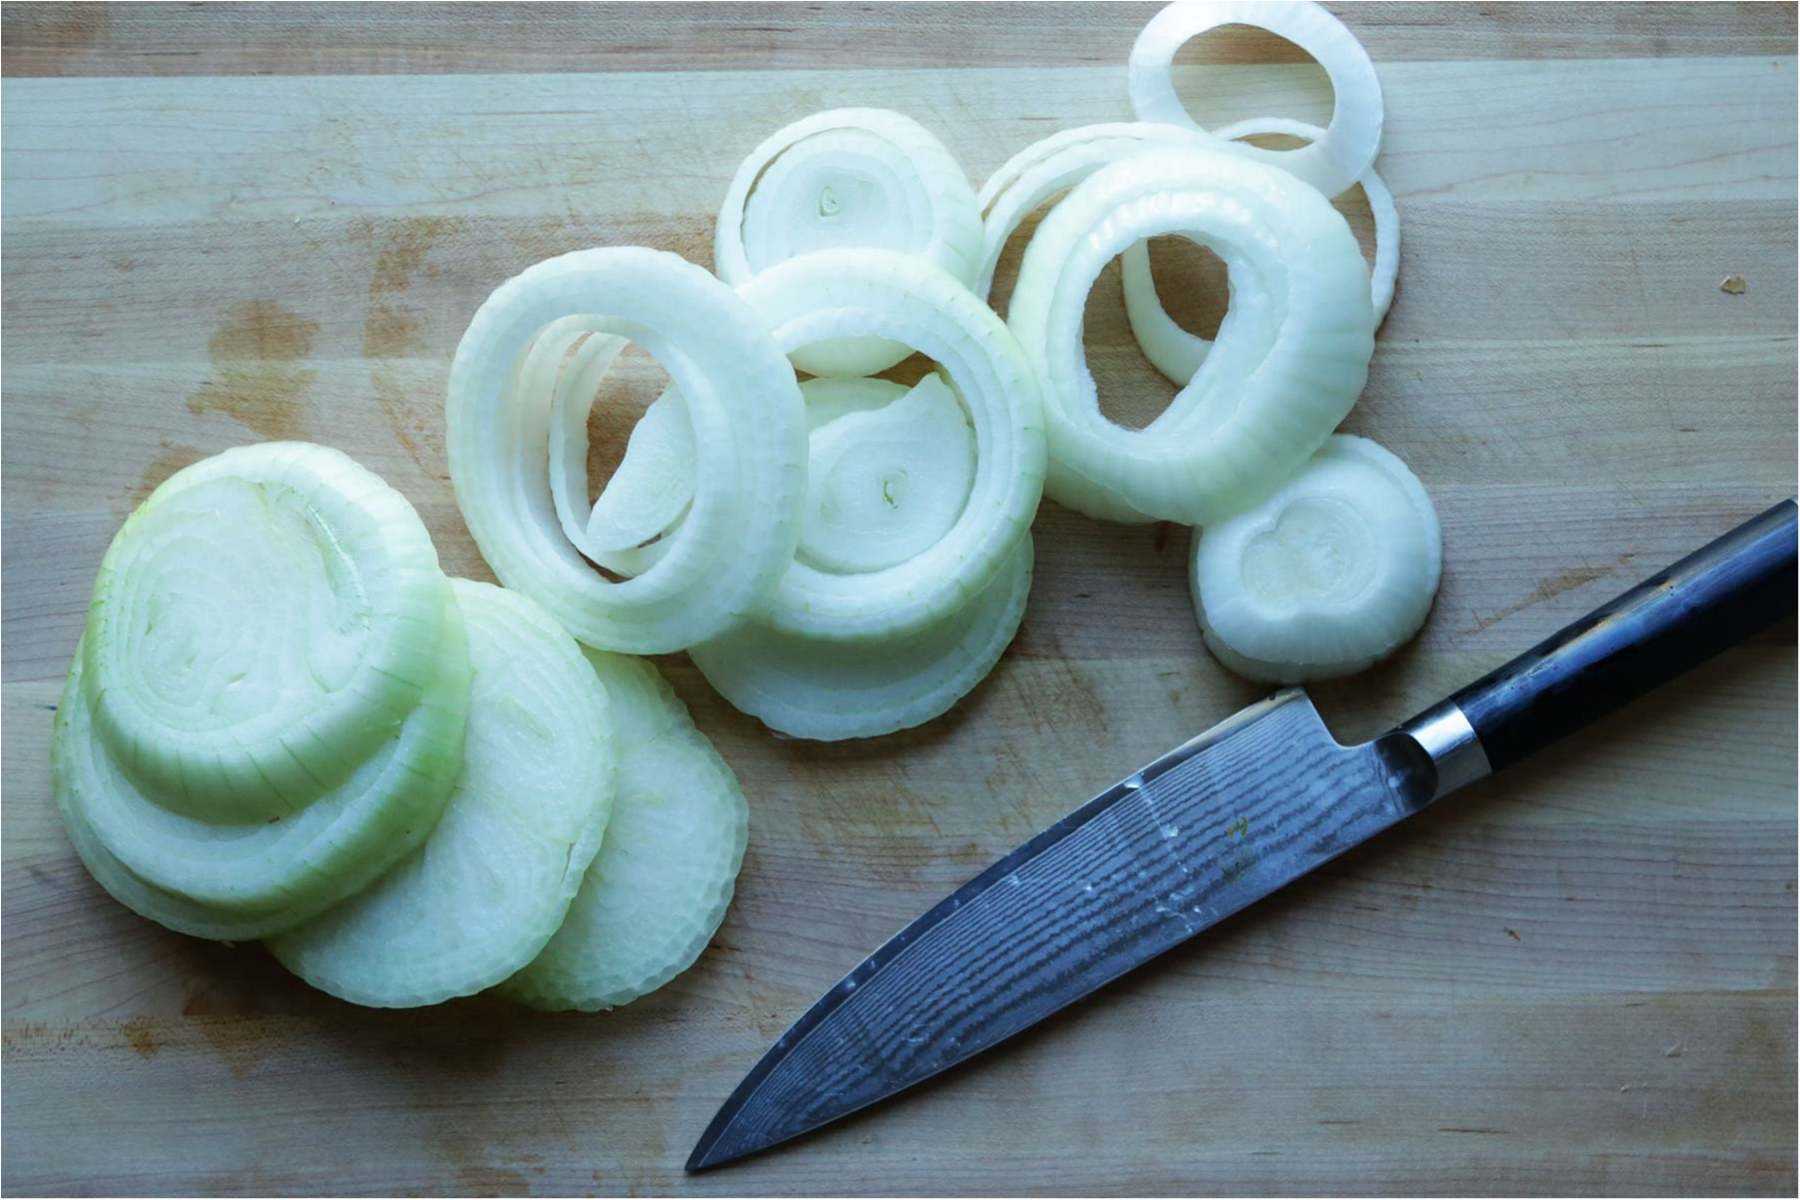 How to Cut an Onion - Chef Billy Parisi